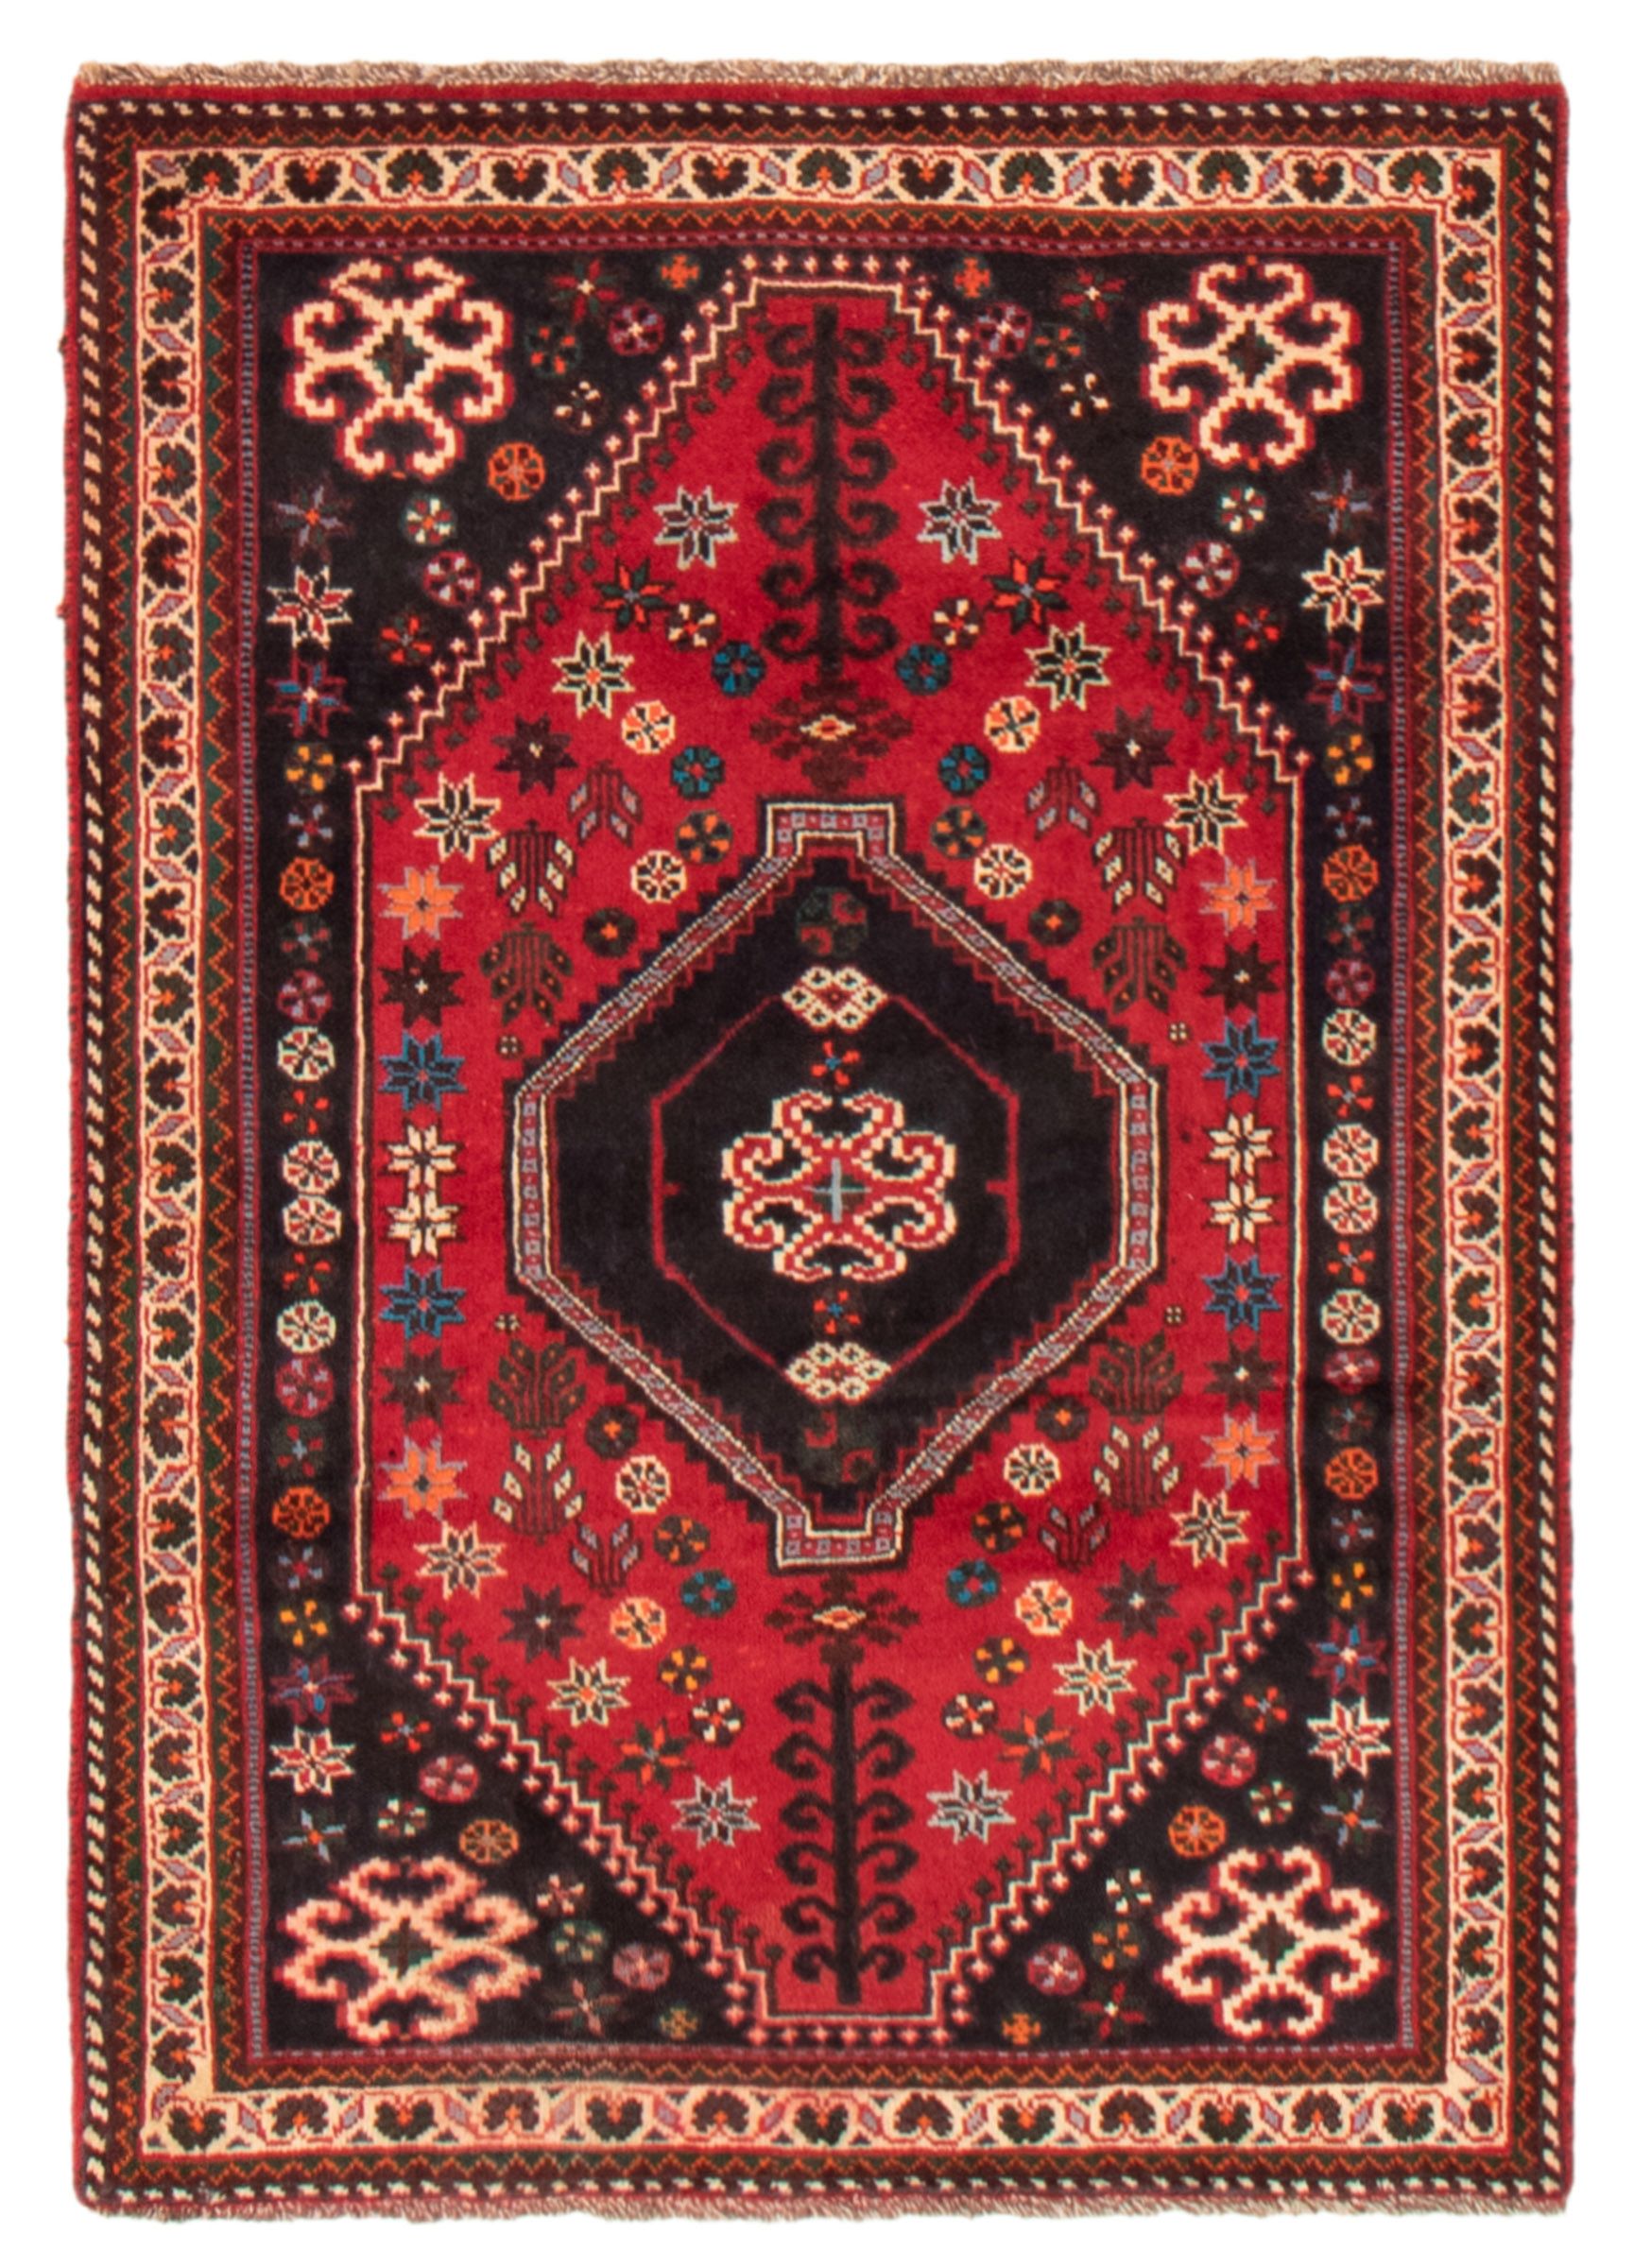 Akhjah Bordered Red Rug 3'7 x 5'3 Hand-Knotted Wool Rug eCarpet Gallery Area Rug for Living Room Bedroom 333727